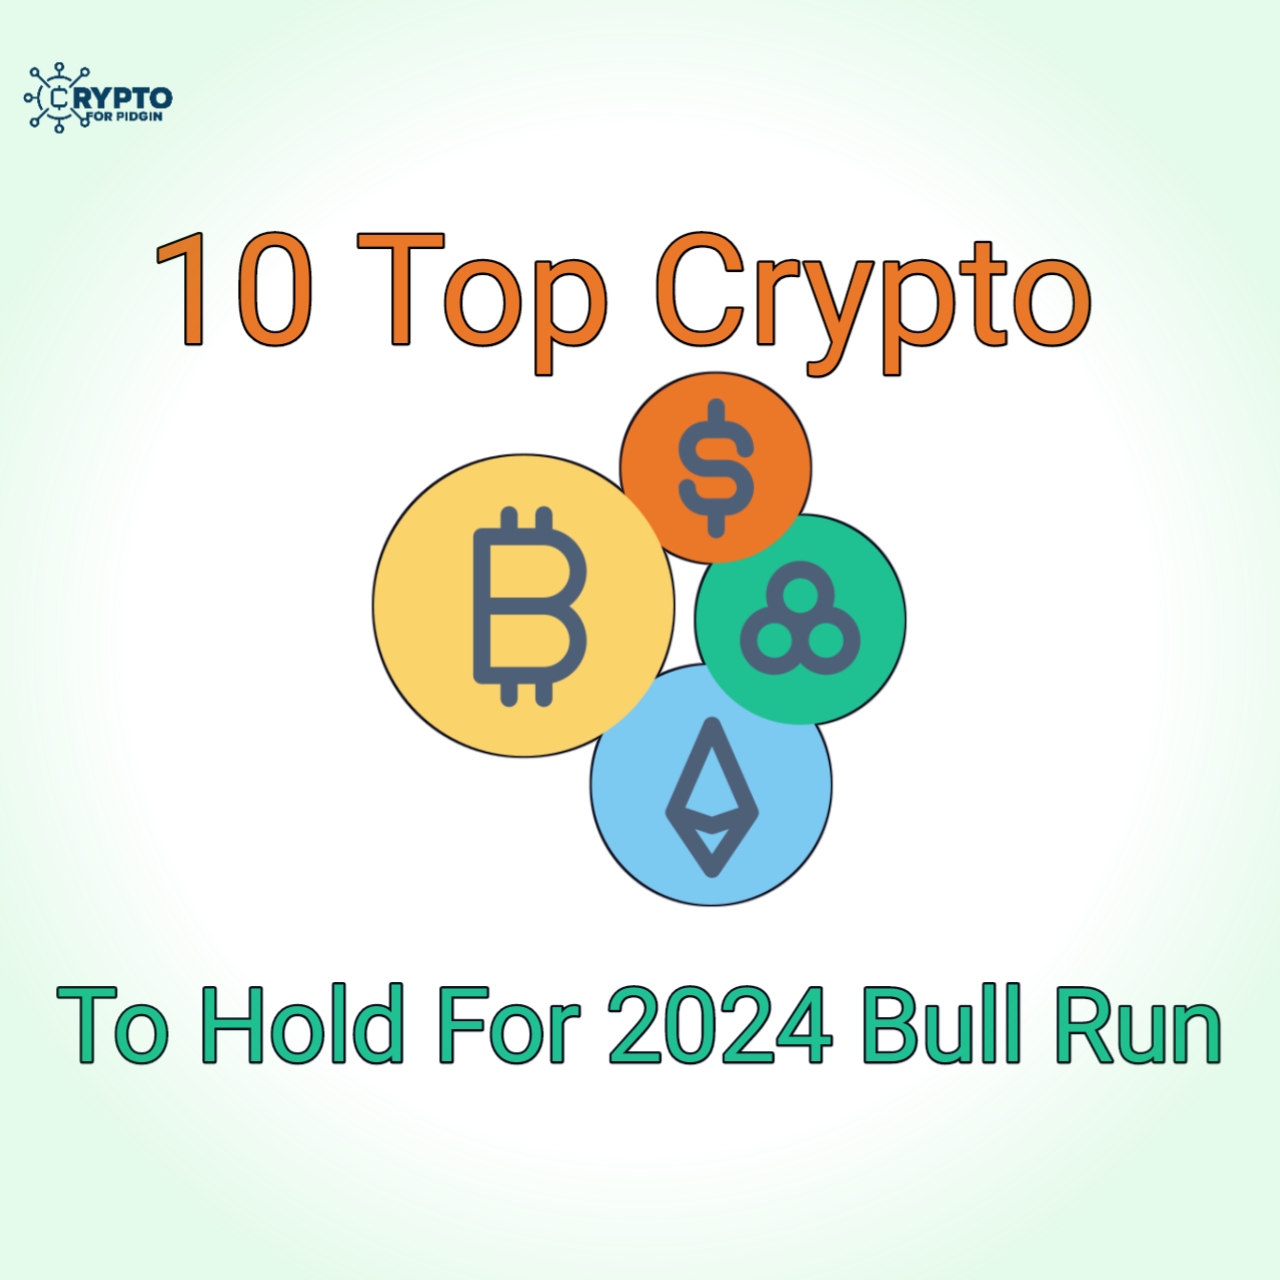 10 Top Crypto to Hold For 2024 Bull Run